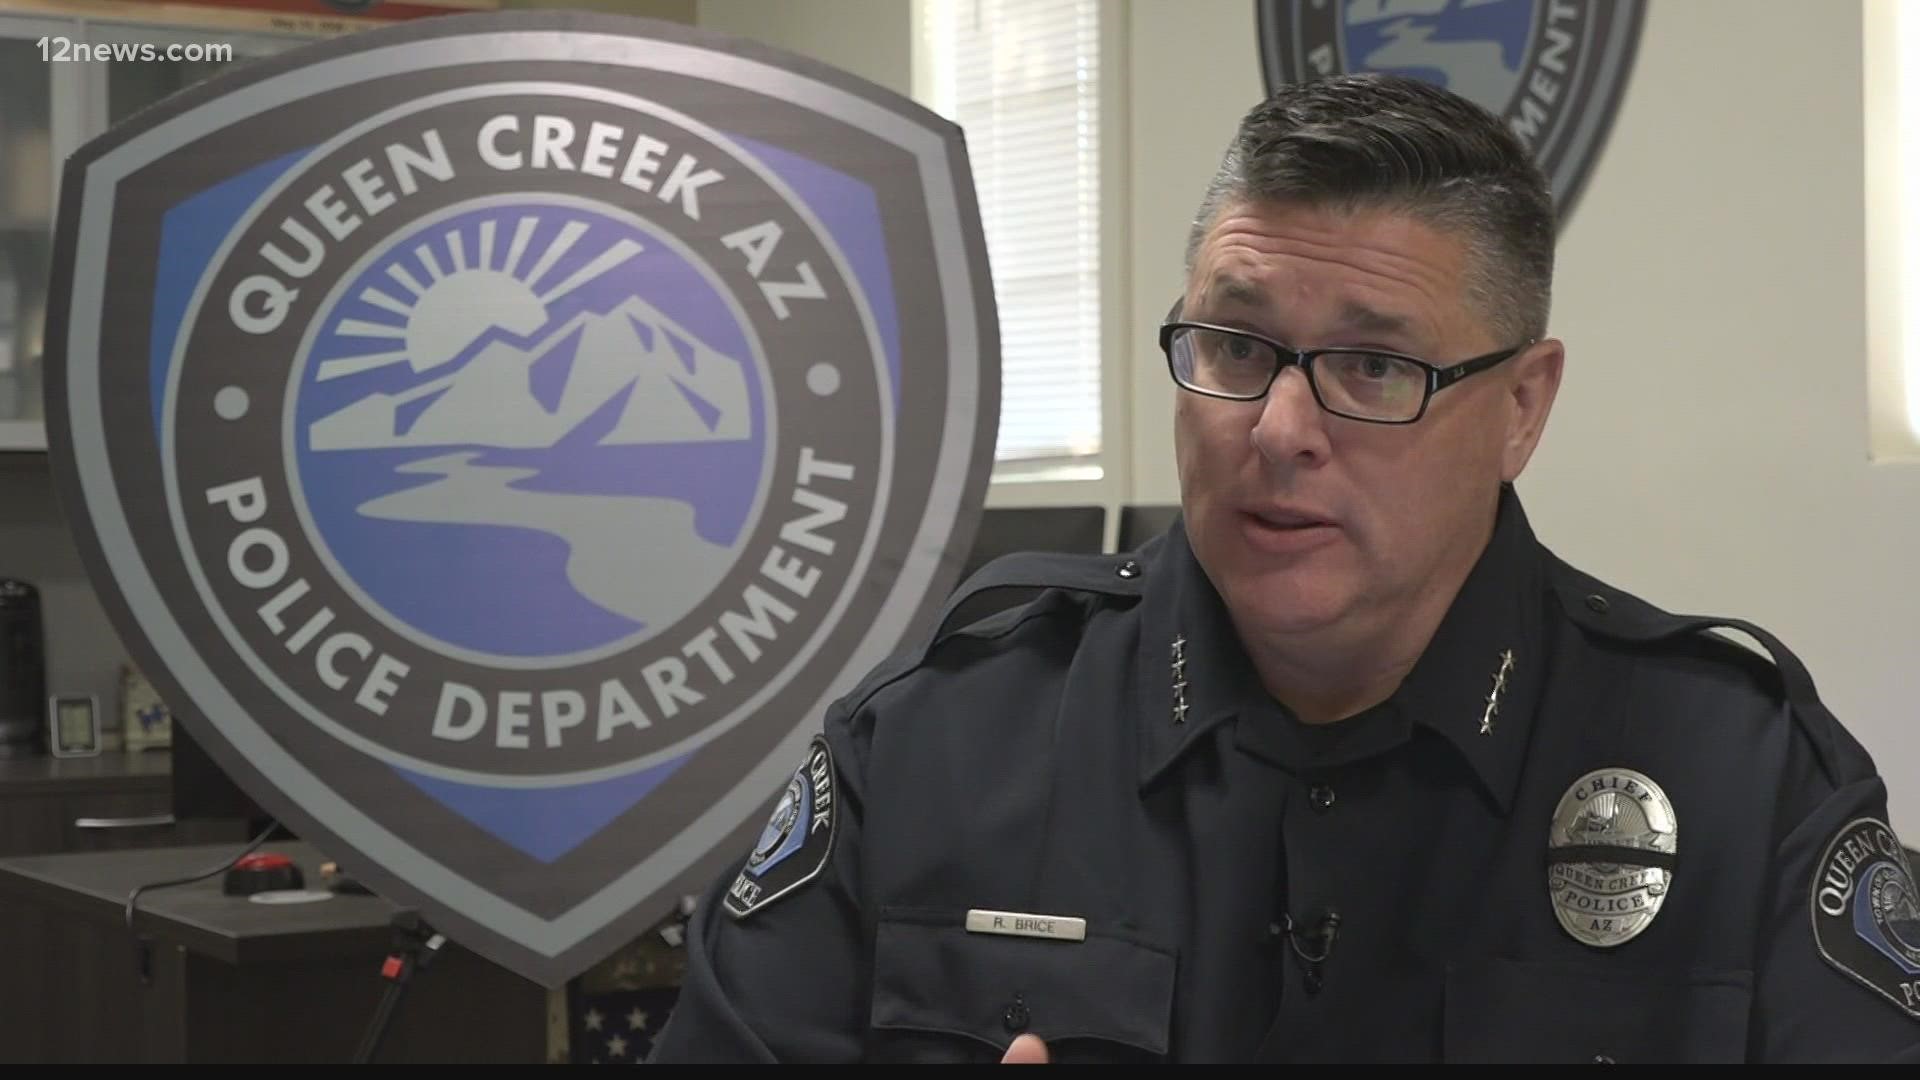 The town of Queen Creek's growing population is prompting the Valley community to start its own police agency in the coming months.